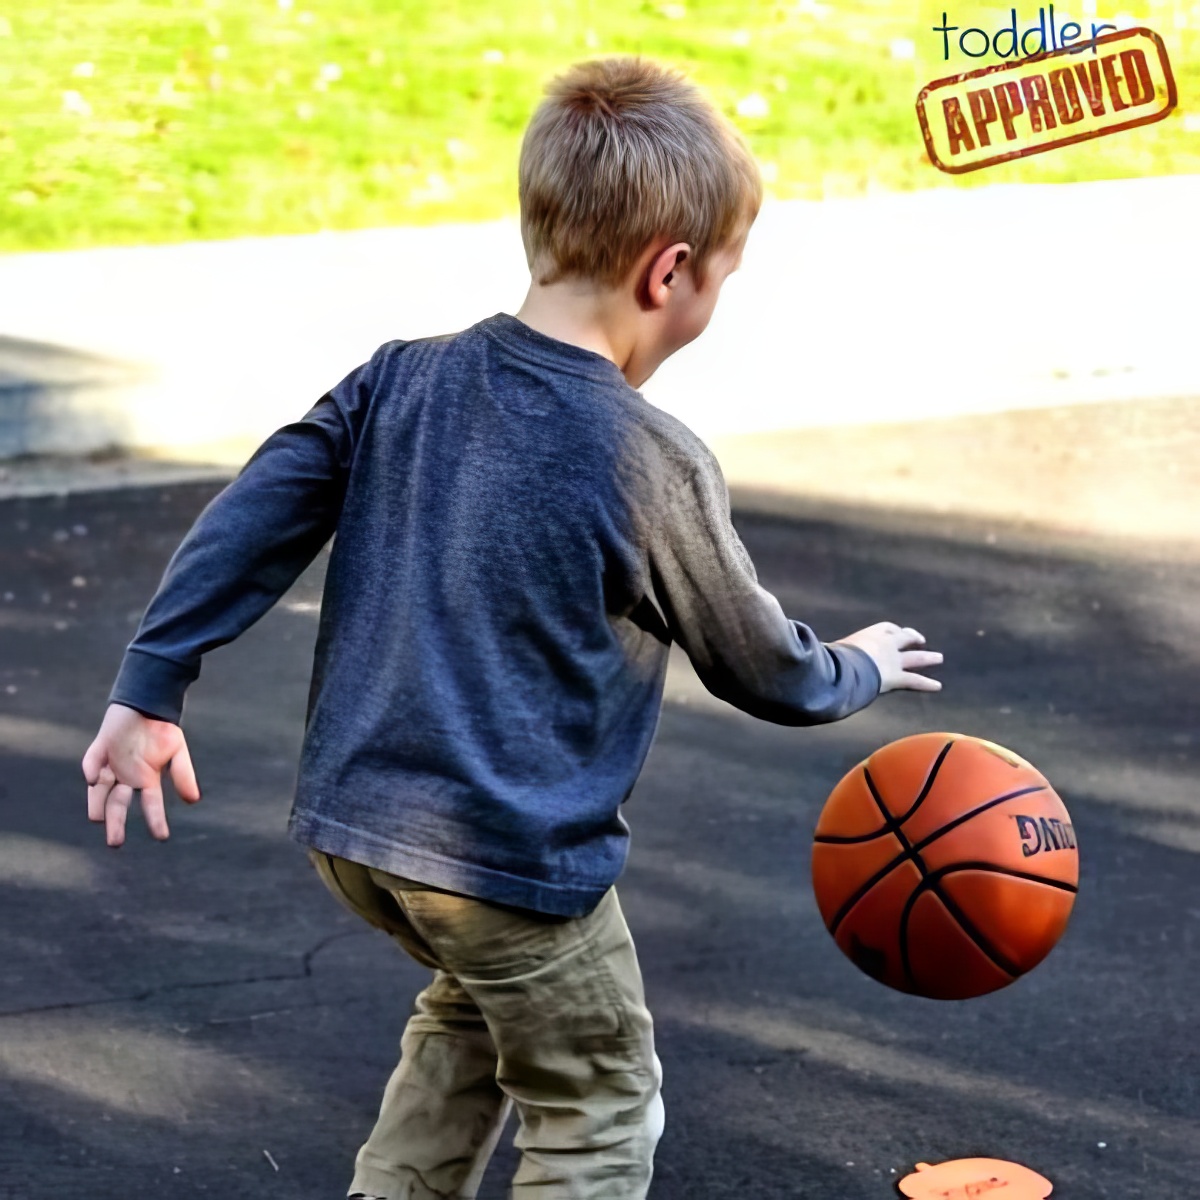 Playing basketball while learning sight words is a sure hit with the kids!